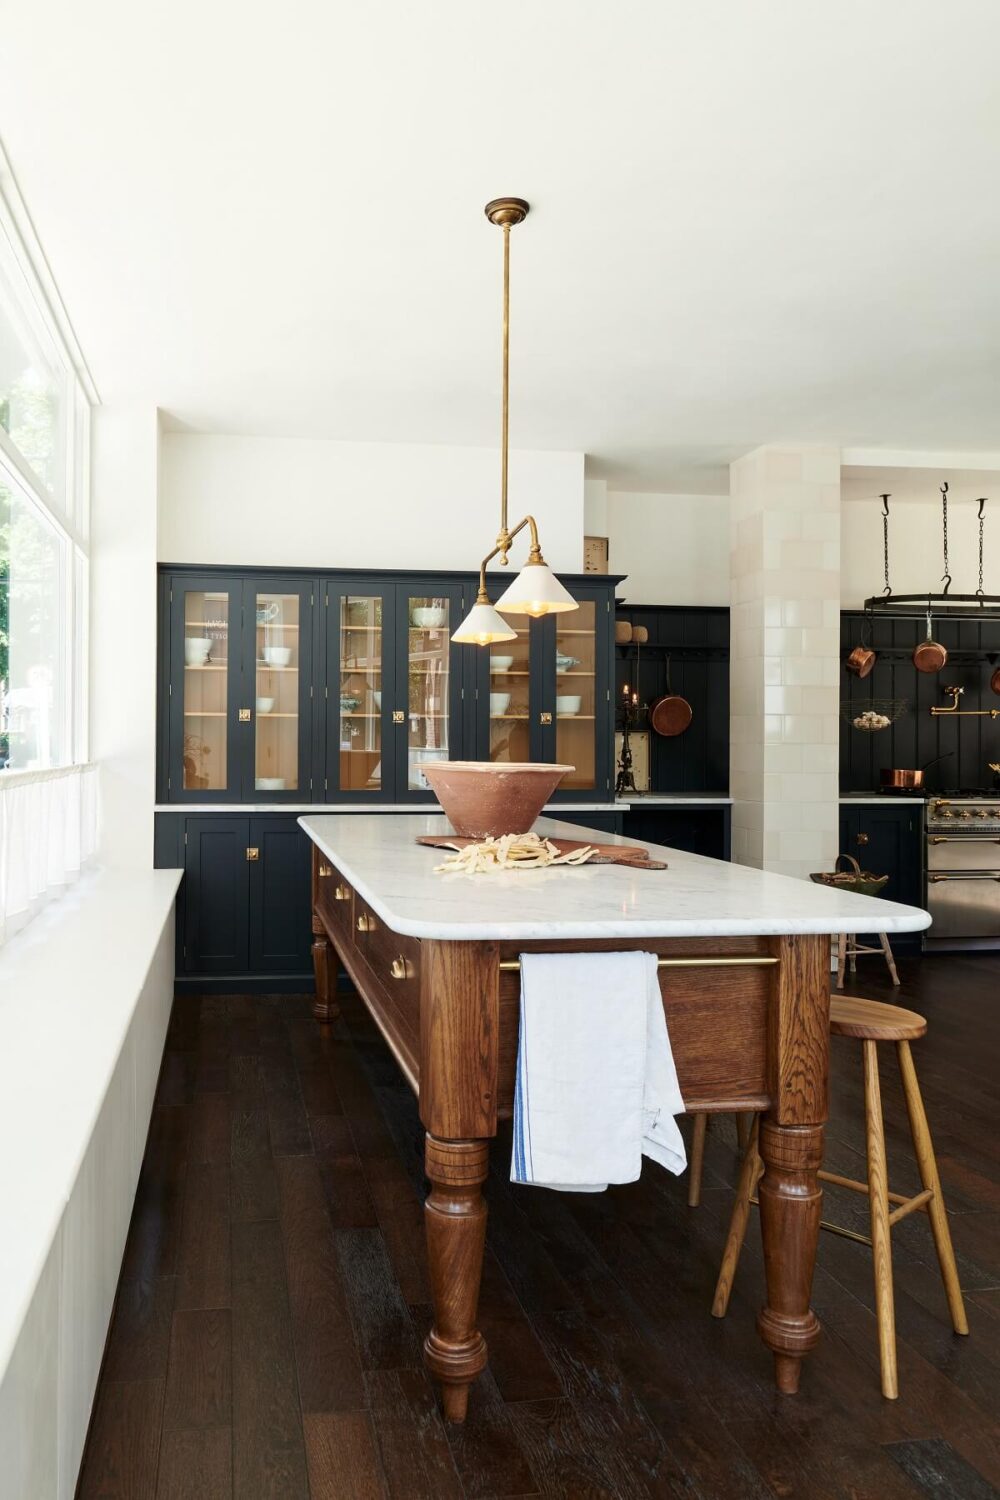 2.TheRealShakerKitchen deVOL LOW RES A Warm Makeover For A deVOL Shaker Kitchen